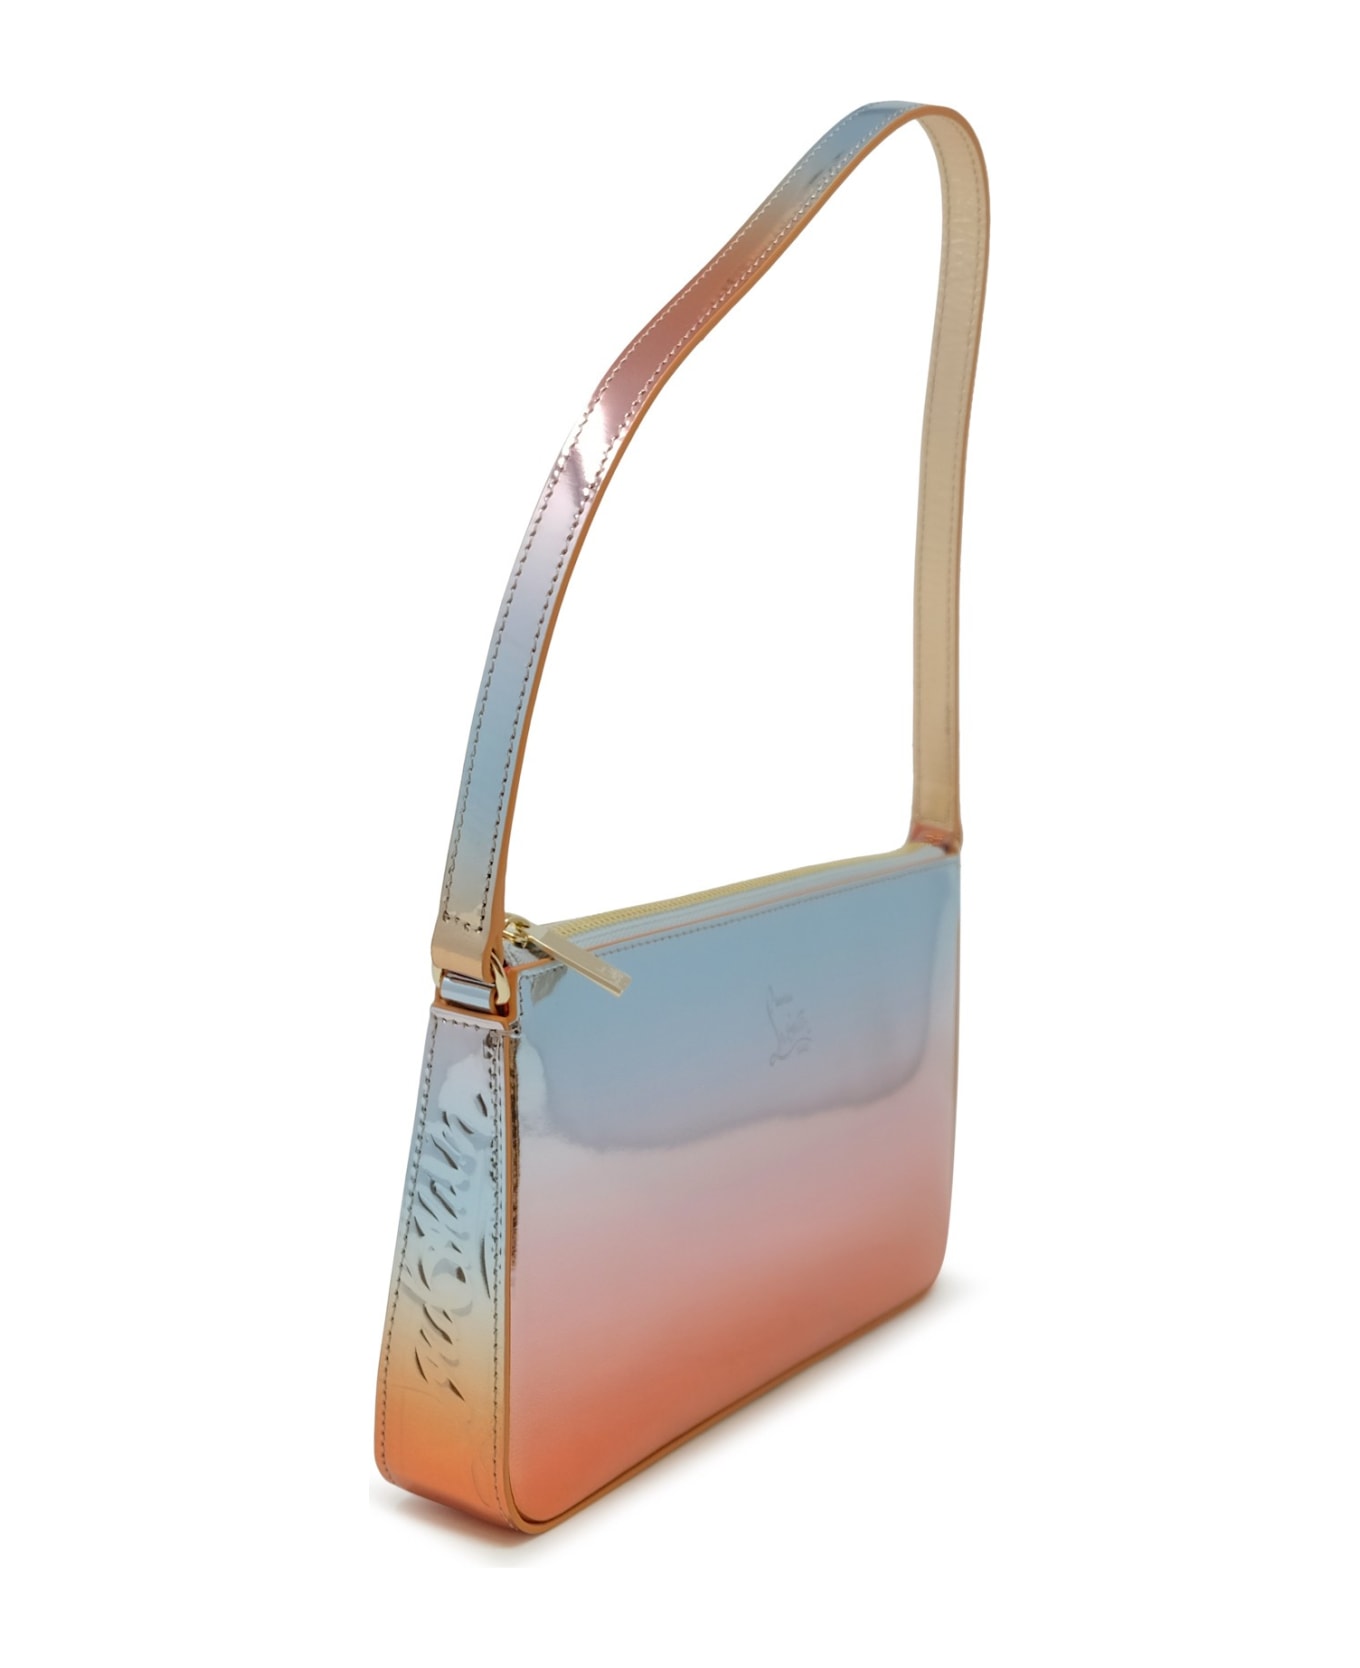 Christian Louboutin Multicolor Leather Shoulder Bag - Silver ショルダーバッグ